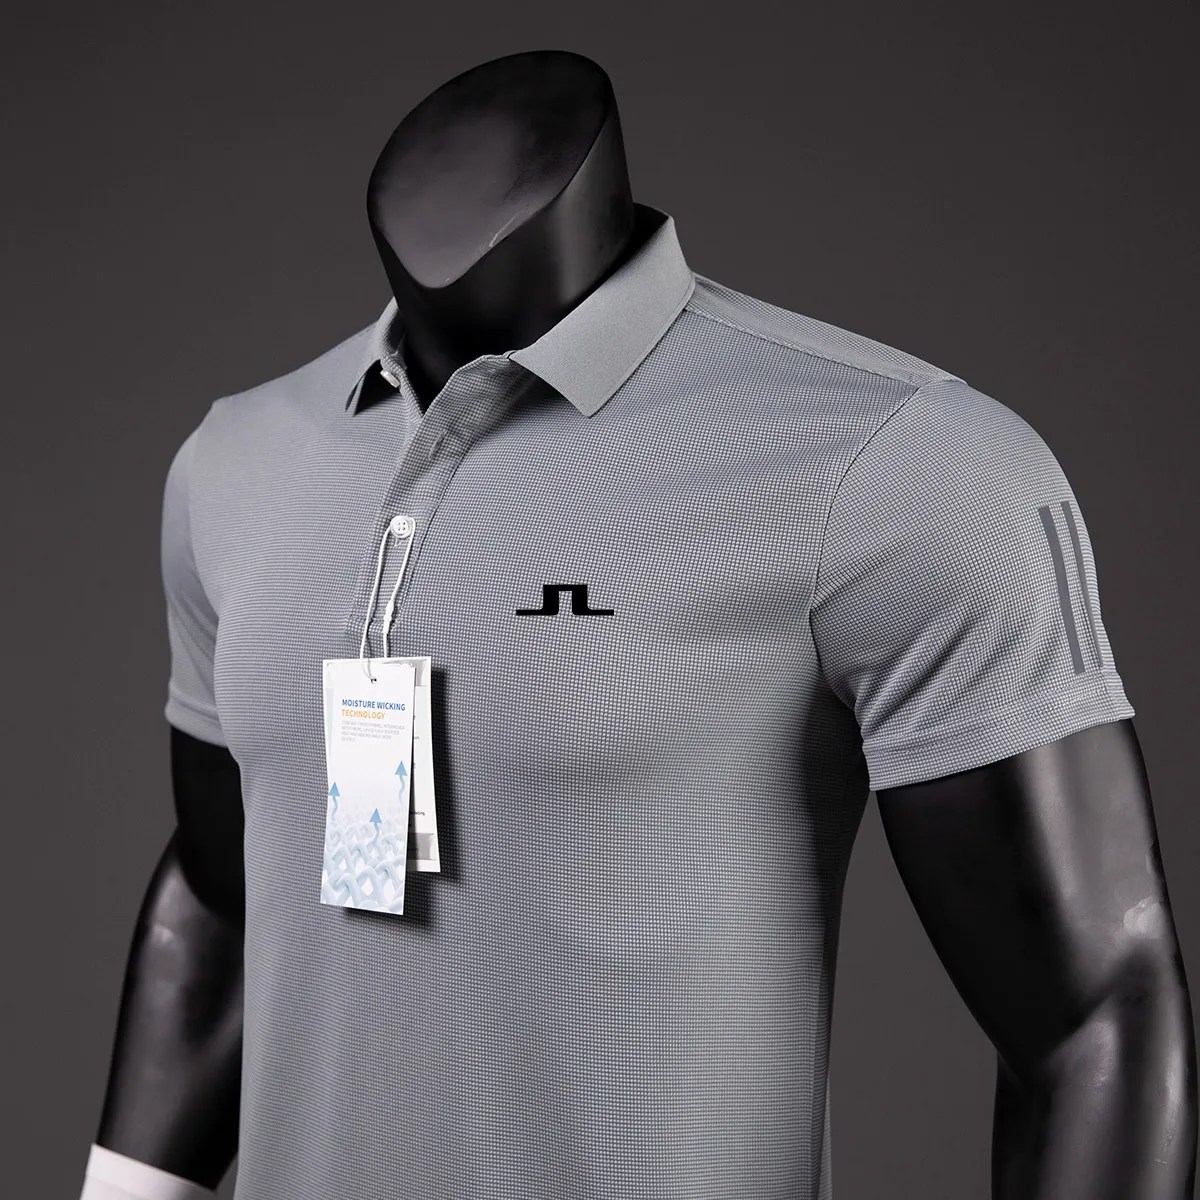 Polos pour hommes 2023 Summer Golf Shirts Hommes Casual Polo Manches courtes Respirant Séchage rapide J Lindeberg Wear Sports T-shirt 230821